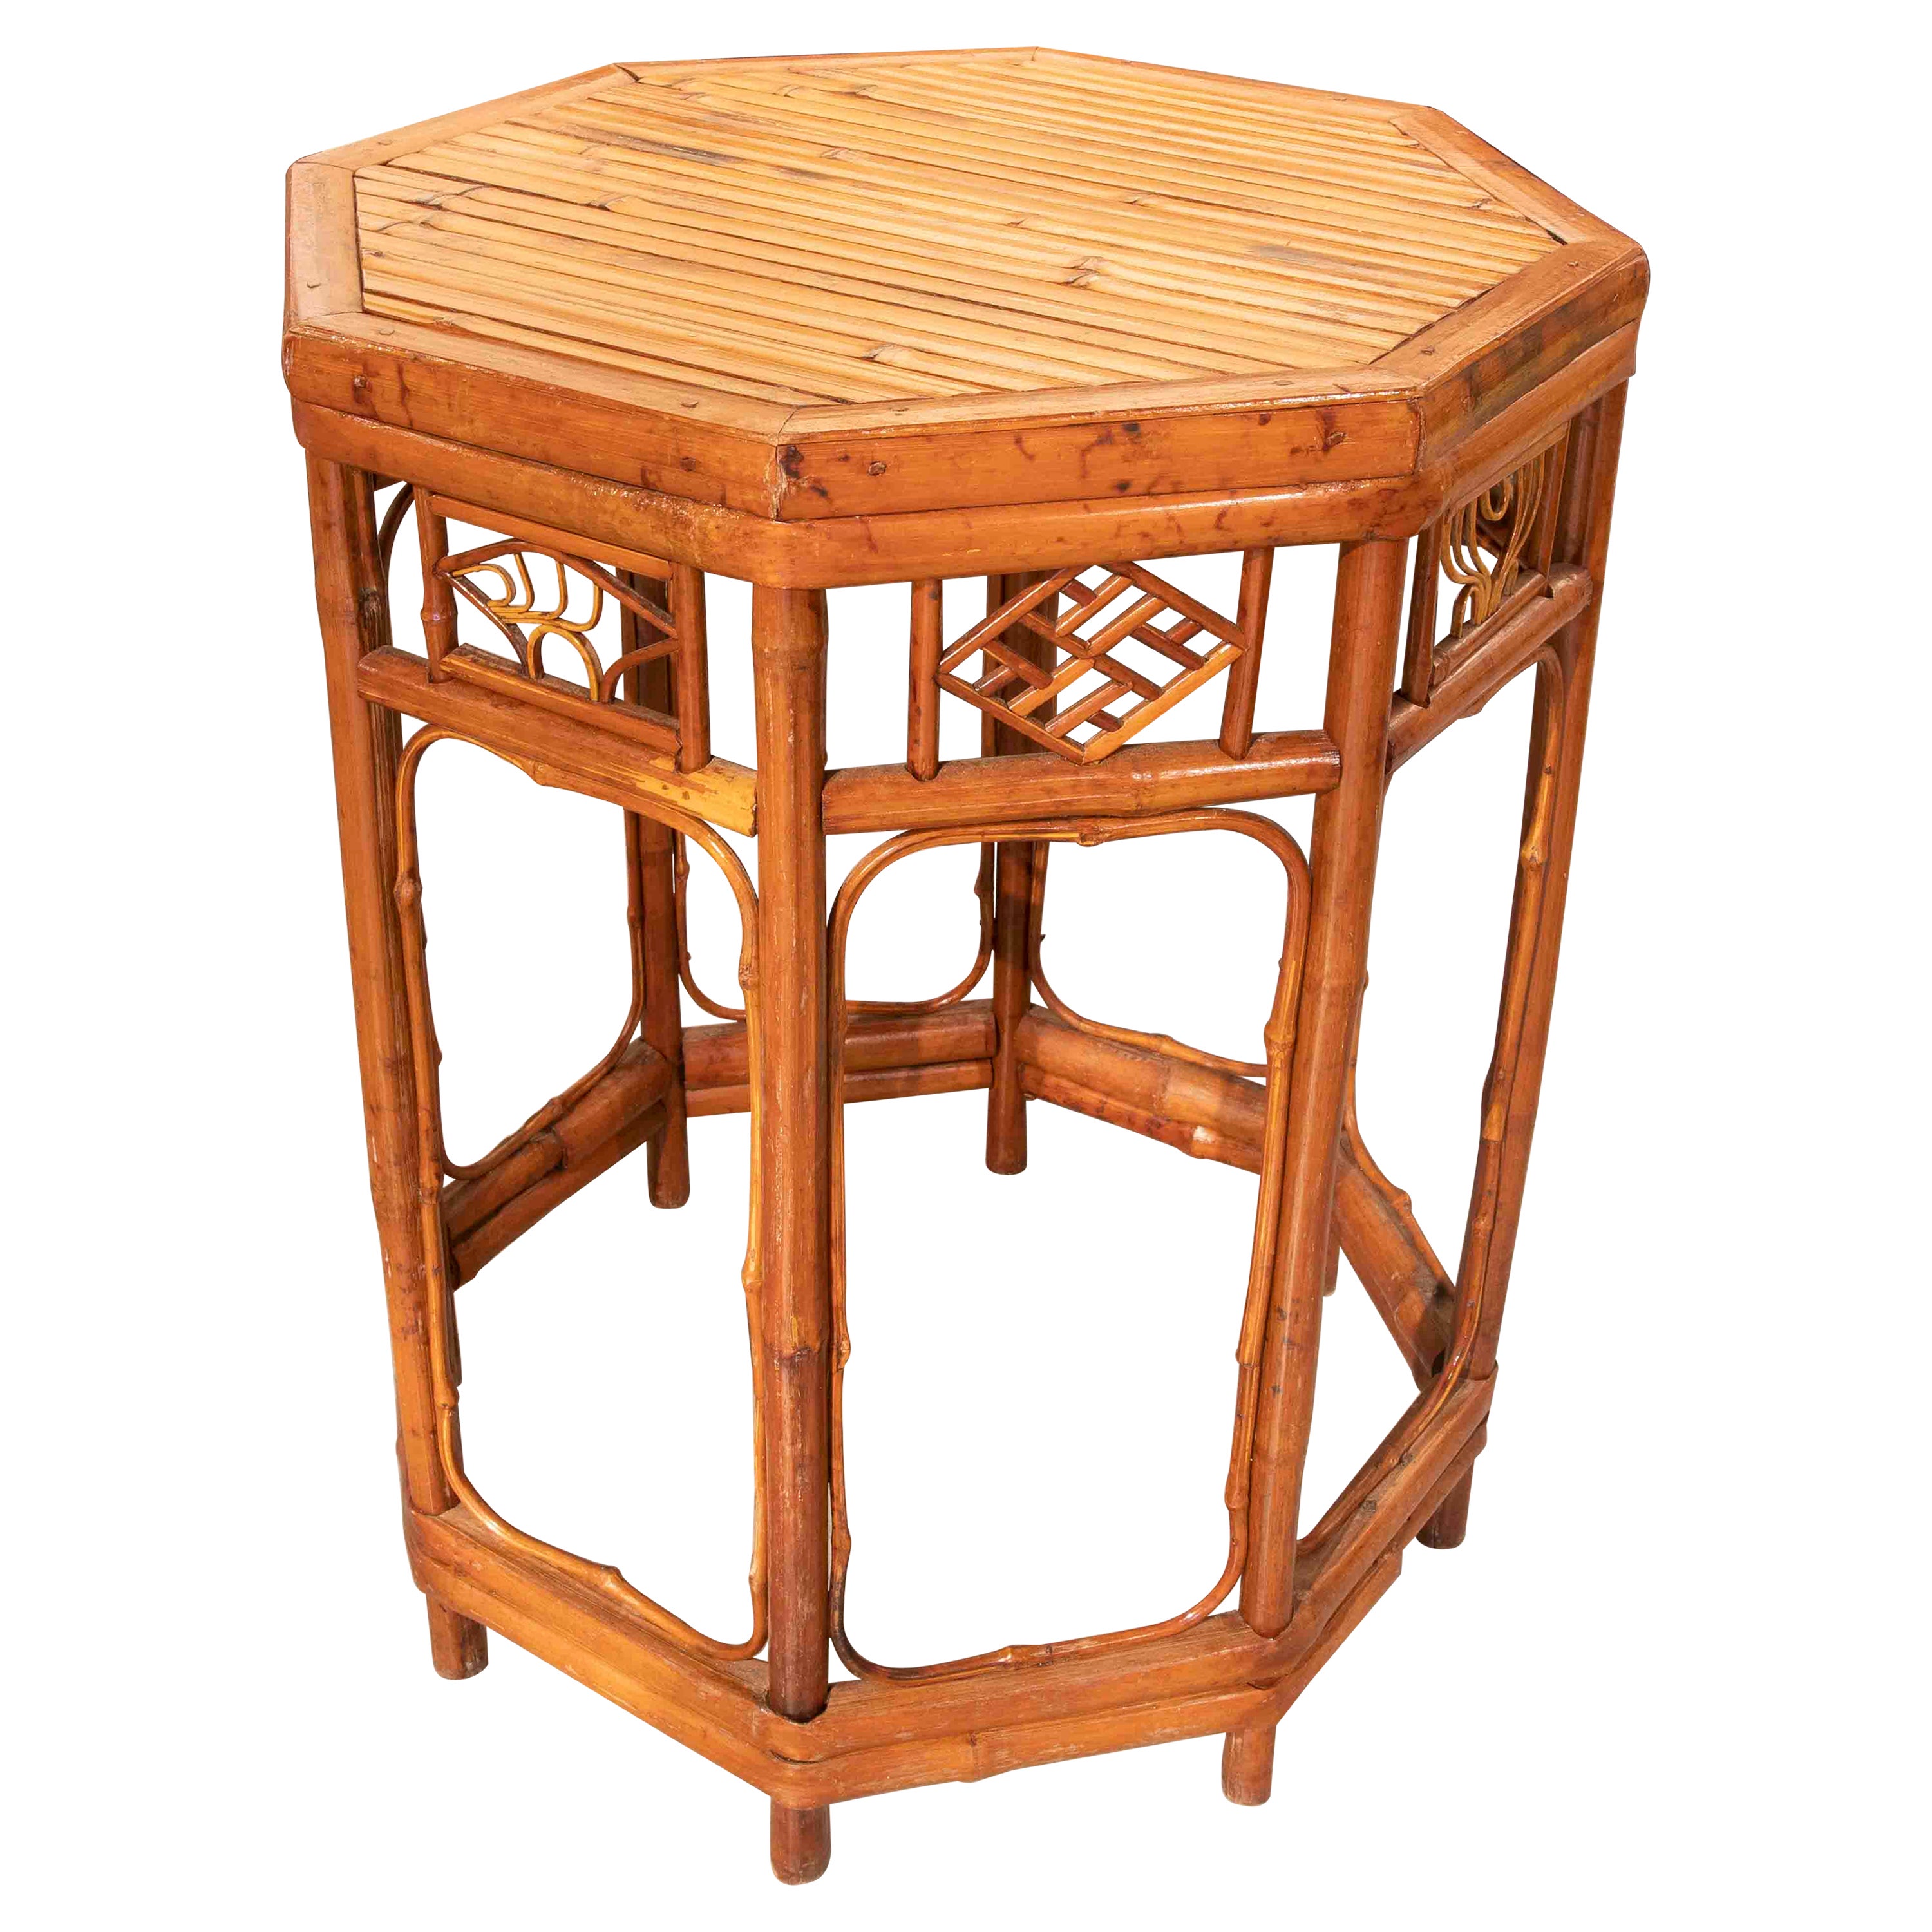 19th Century Chinese Bamboo Side Table with Octagonal Shape